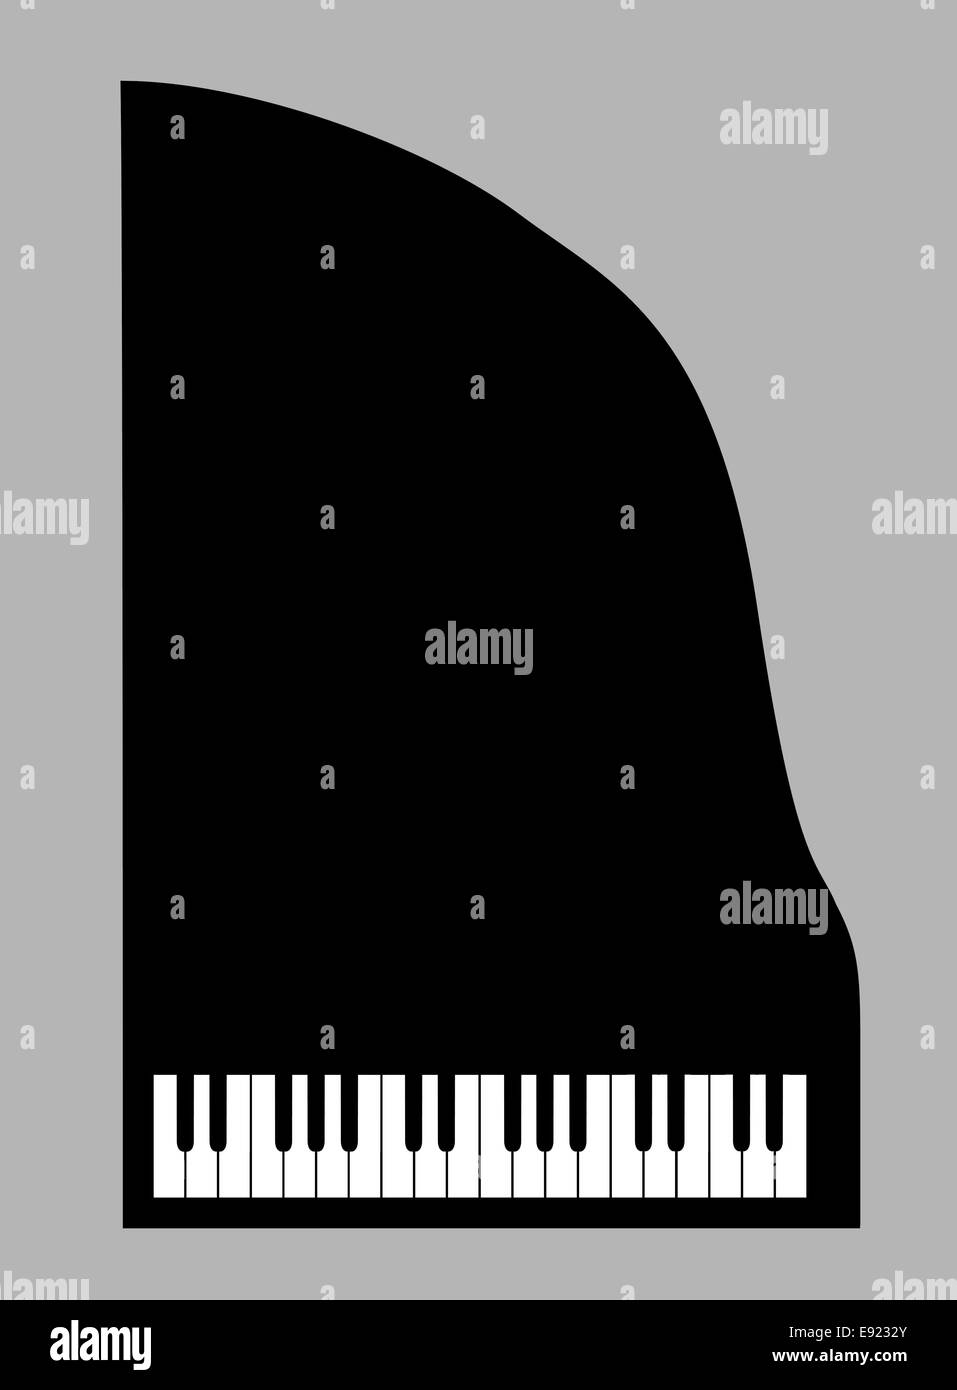 piano silhouette on gray background Stock Photo